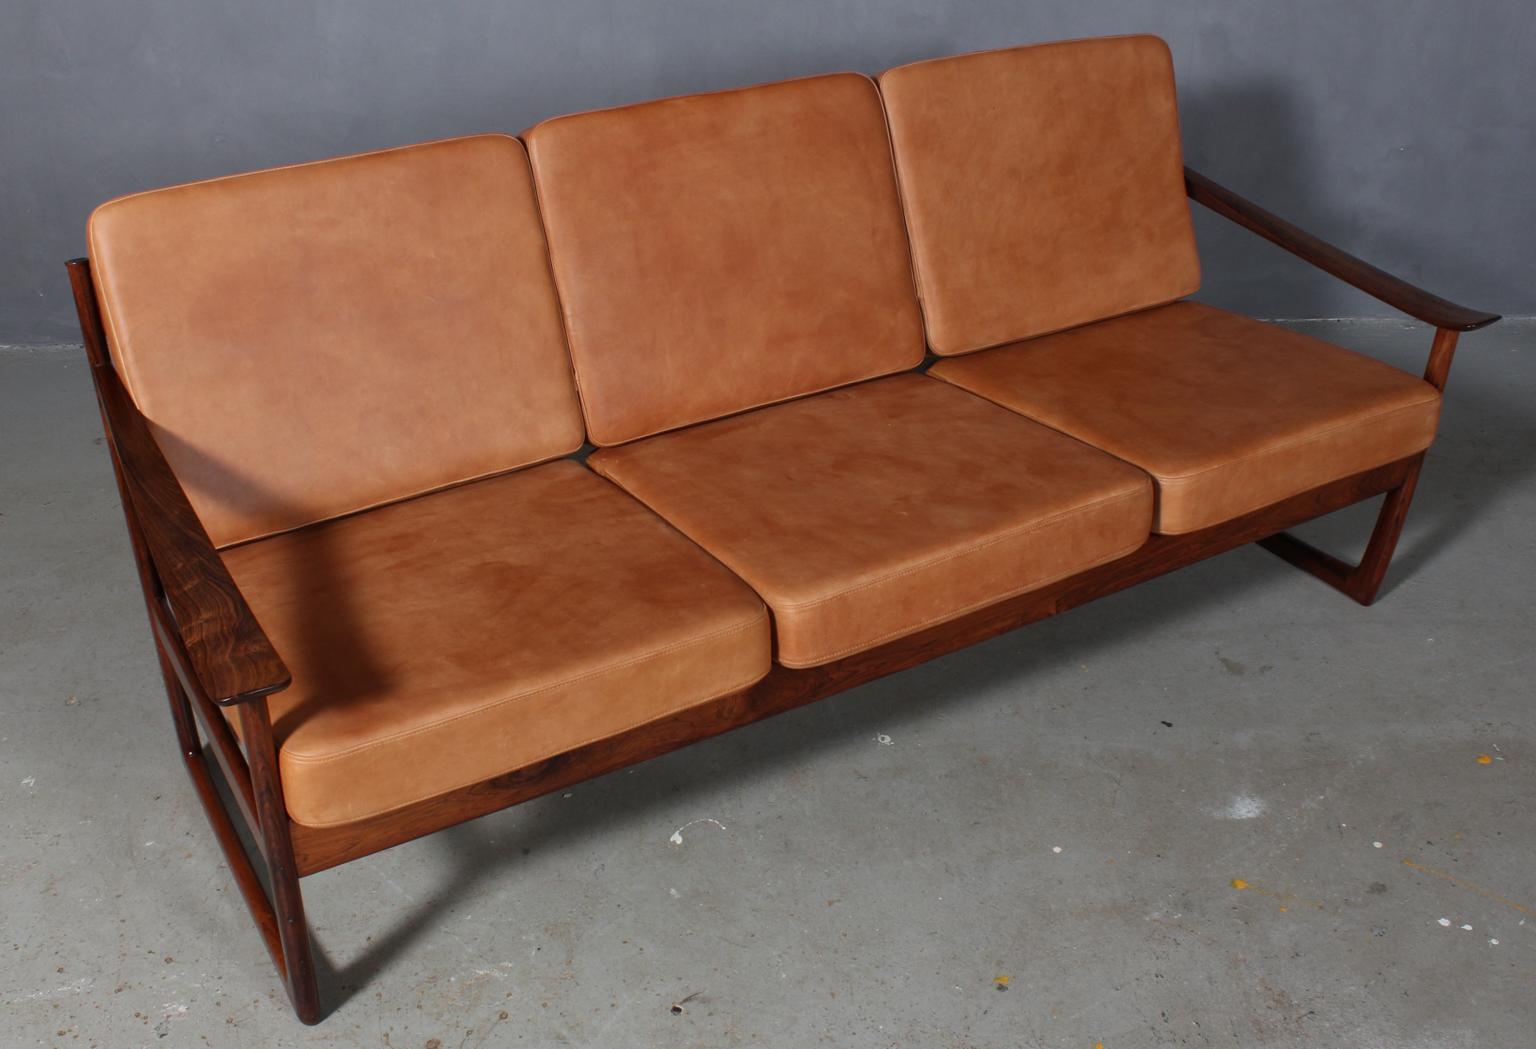 Peter Hvidt & Orla Mølgaard Nielsen three-seat sofa in rosewood. New upholstered cushions with vintage tan aniline leather.

Made by France & Daverkosen, Model 130.